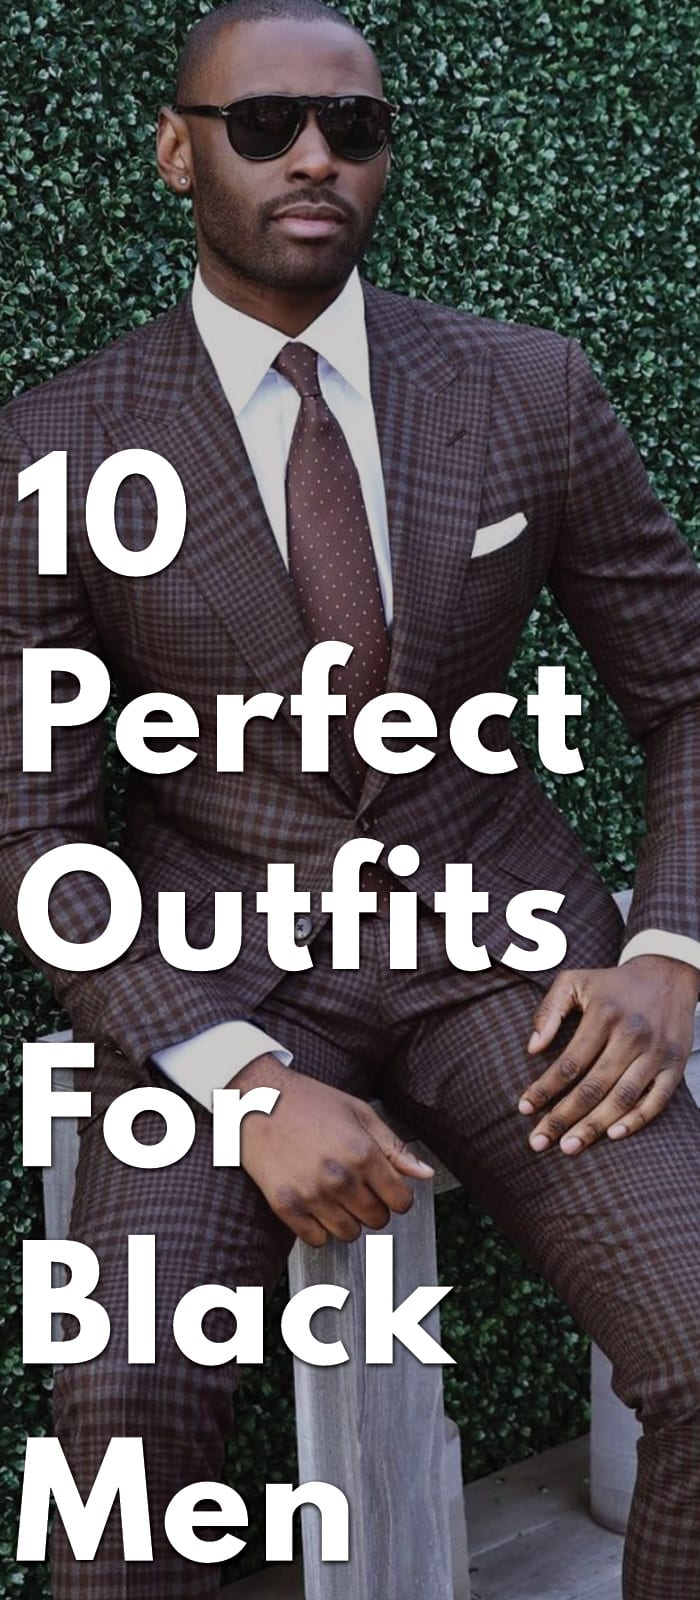 10-Perfect-Outfits-for-Black-Men